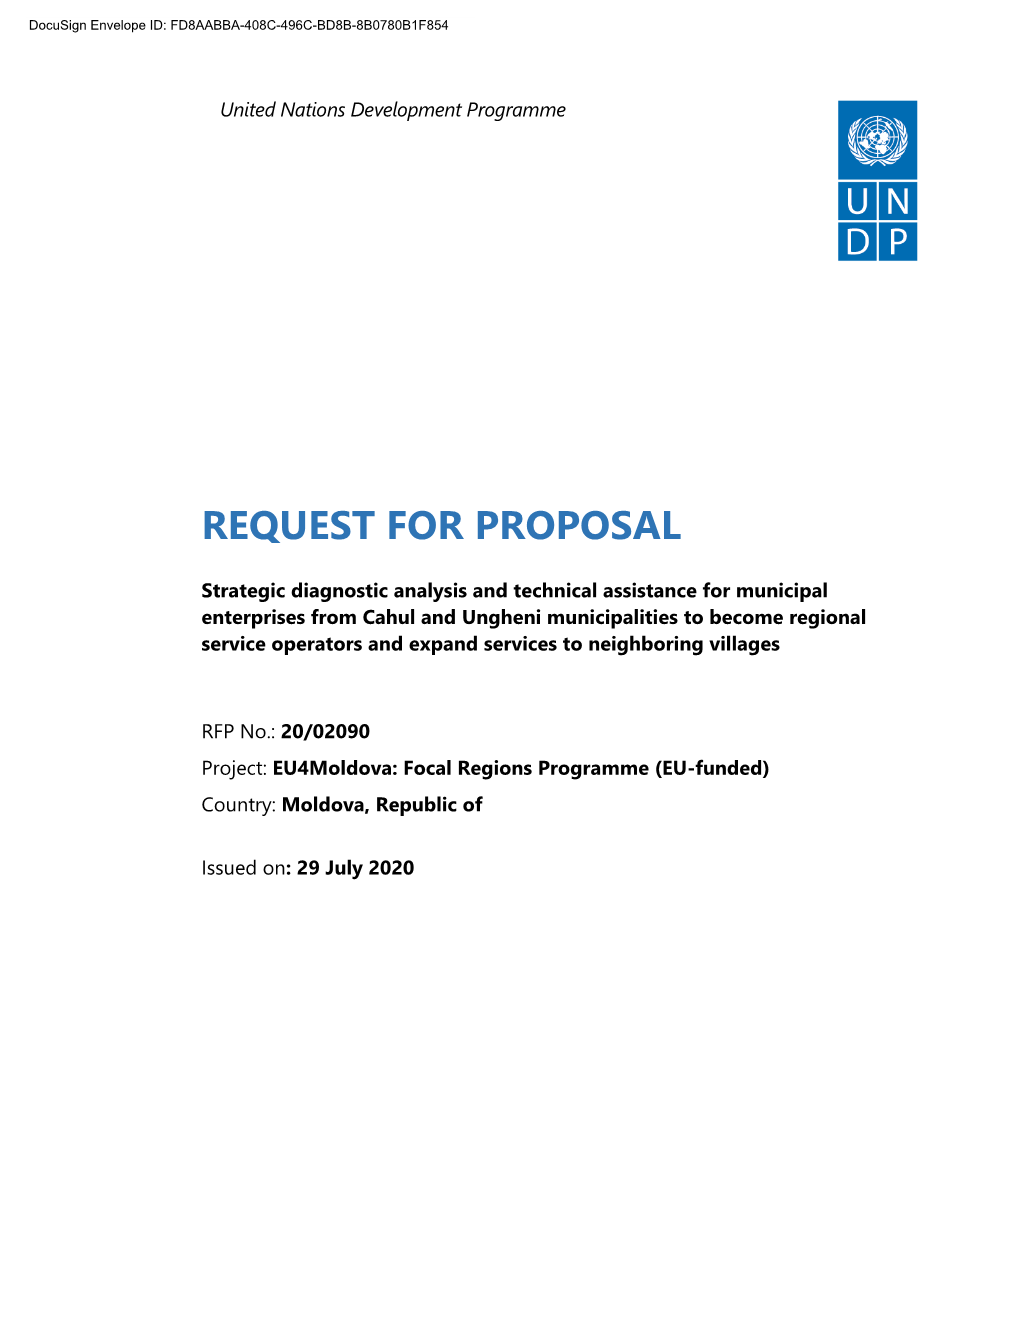 Request for Proposal (RFP) 150K and Above